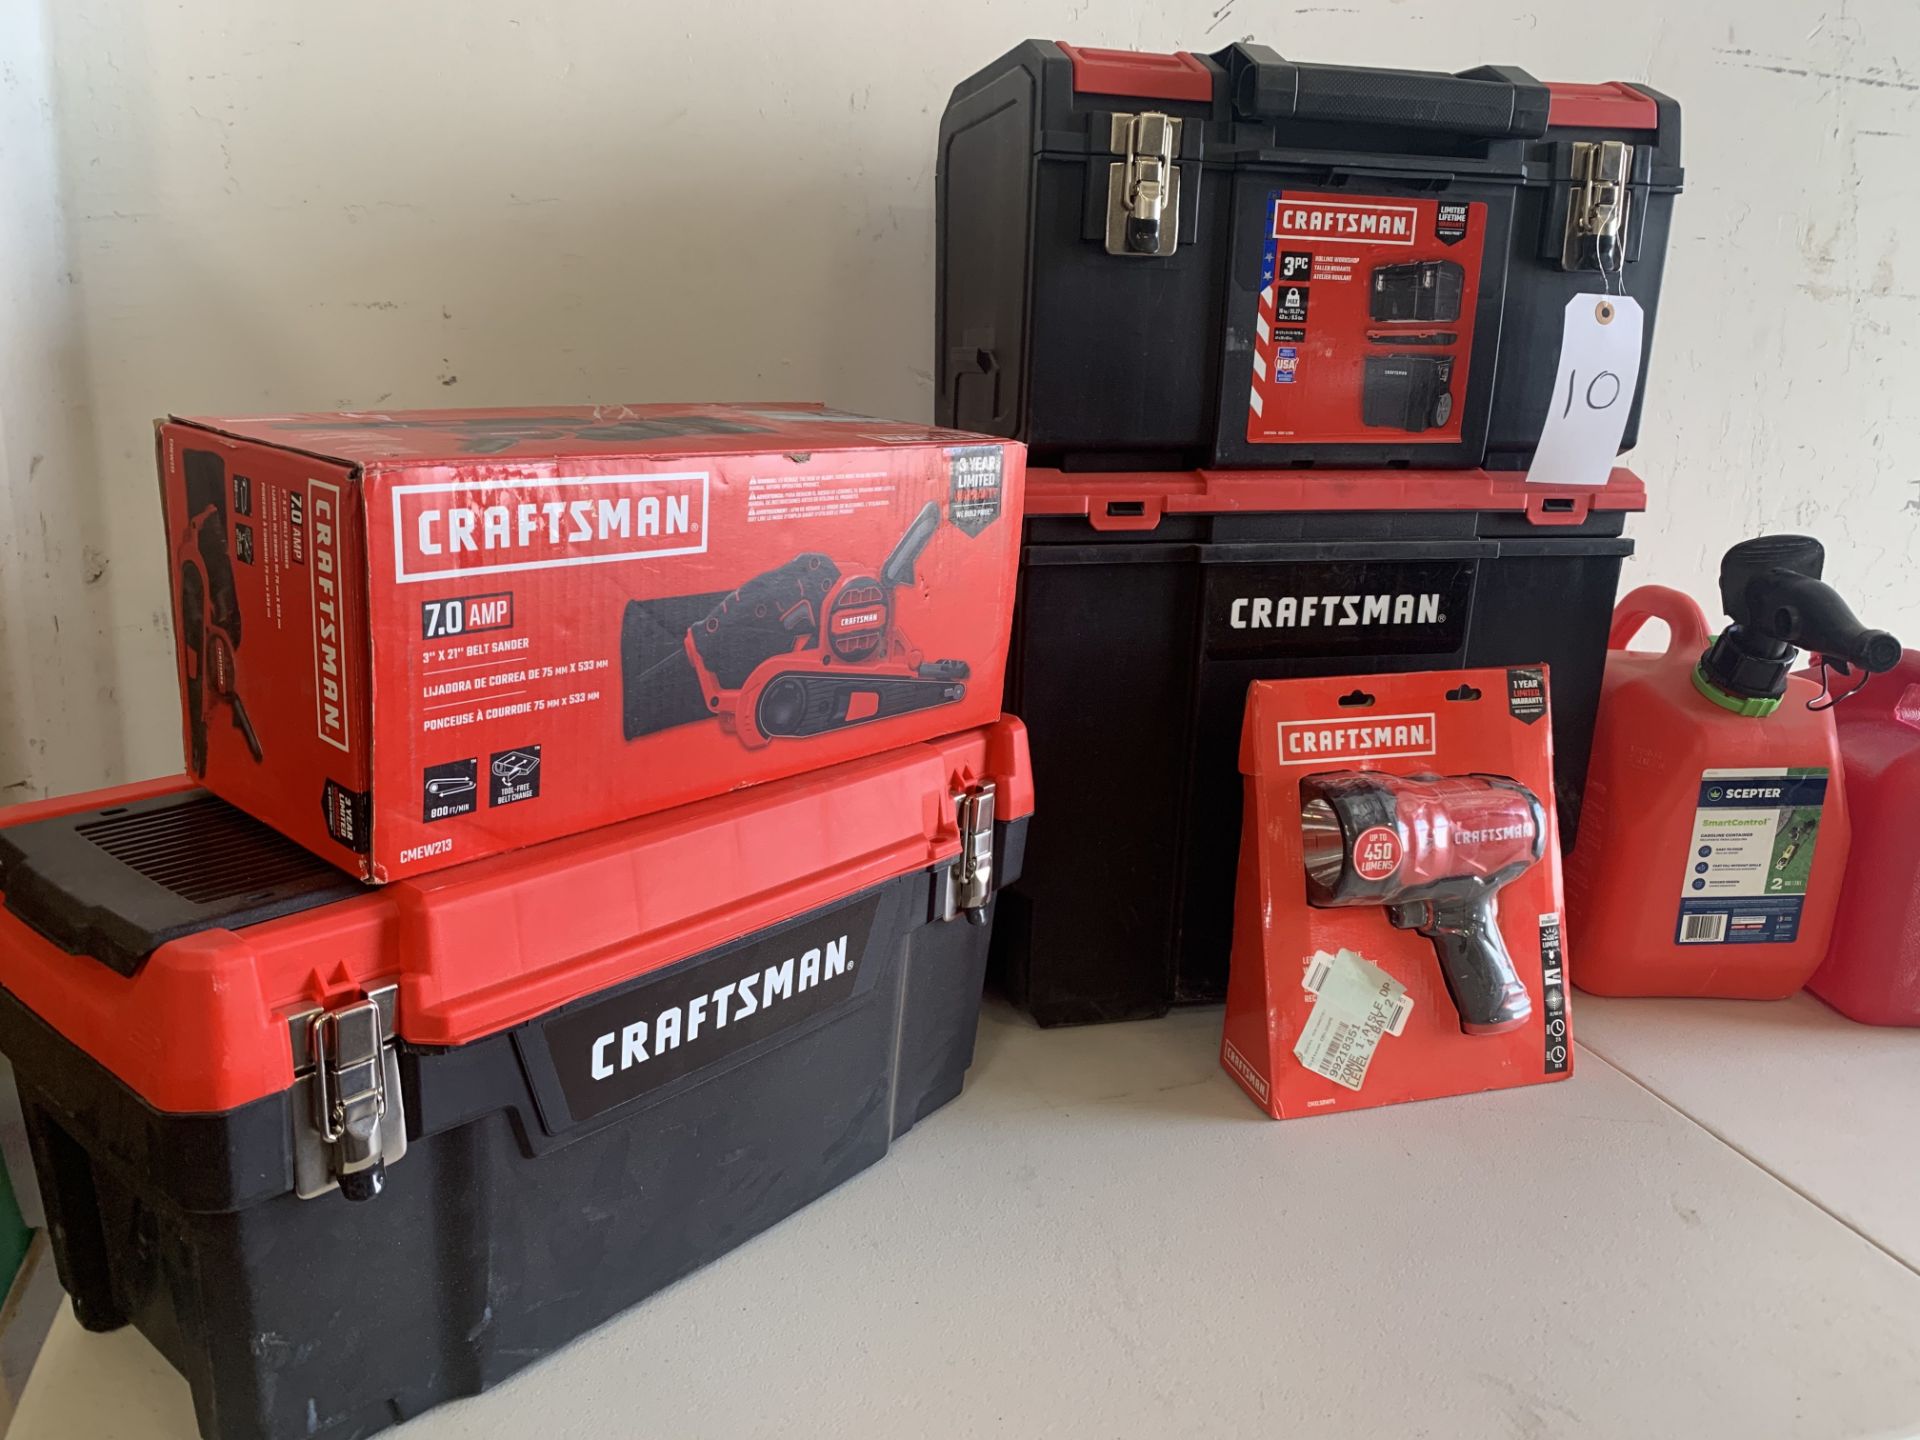 Craftsman Tools and Gas Cans, 7 Items - Image 2 of 3